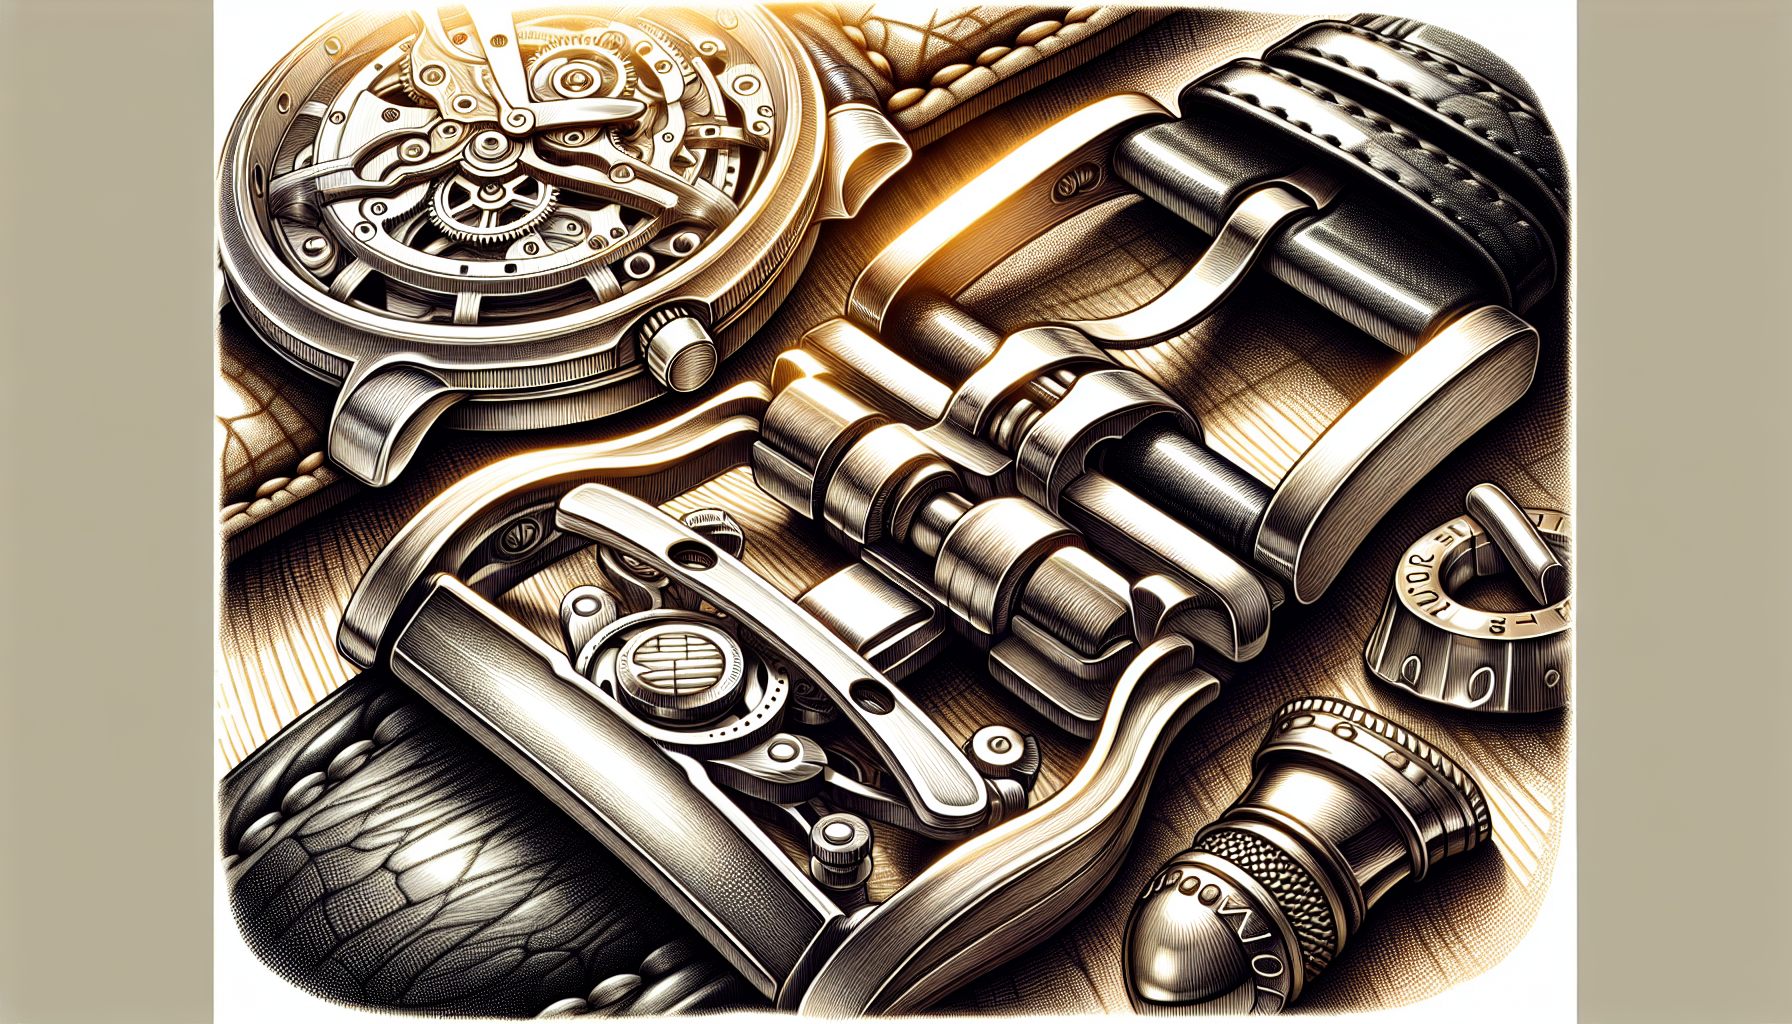 Illustration of stylish buckles and clasps for leather watch bands